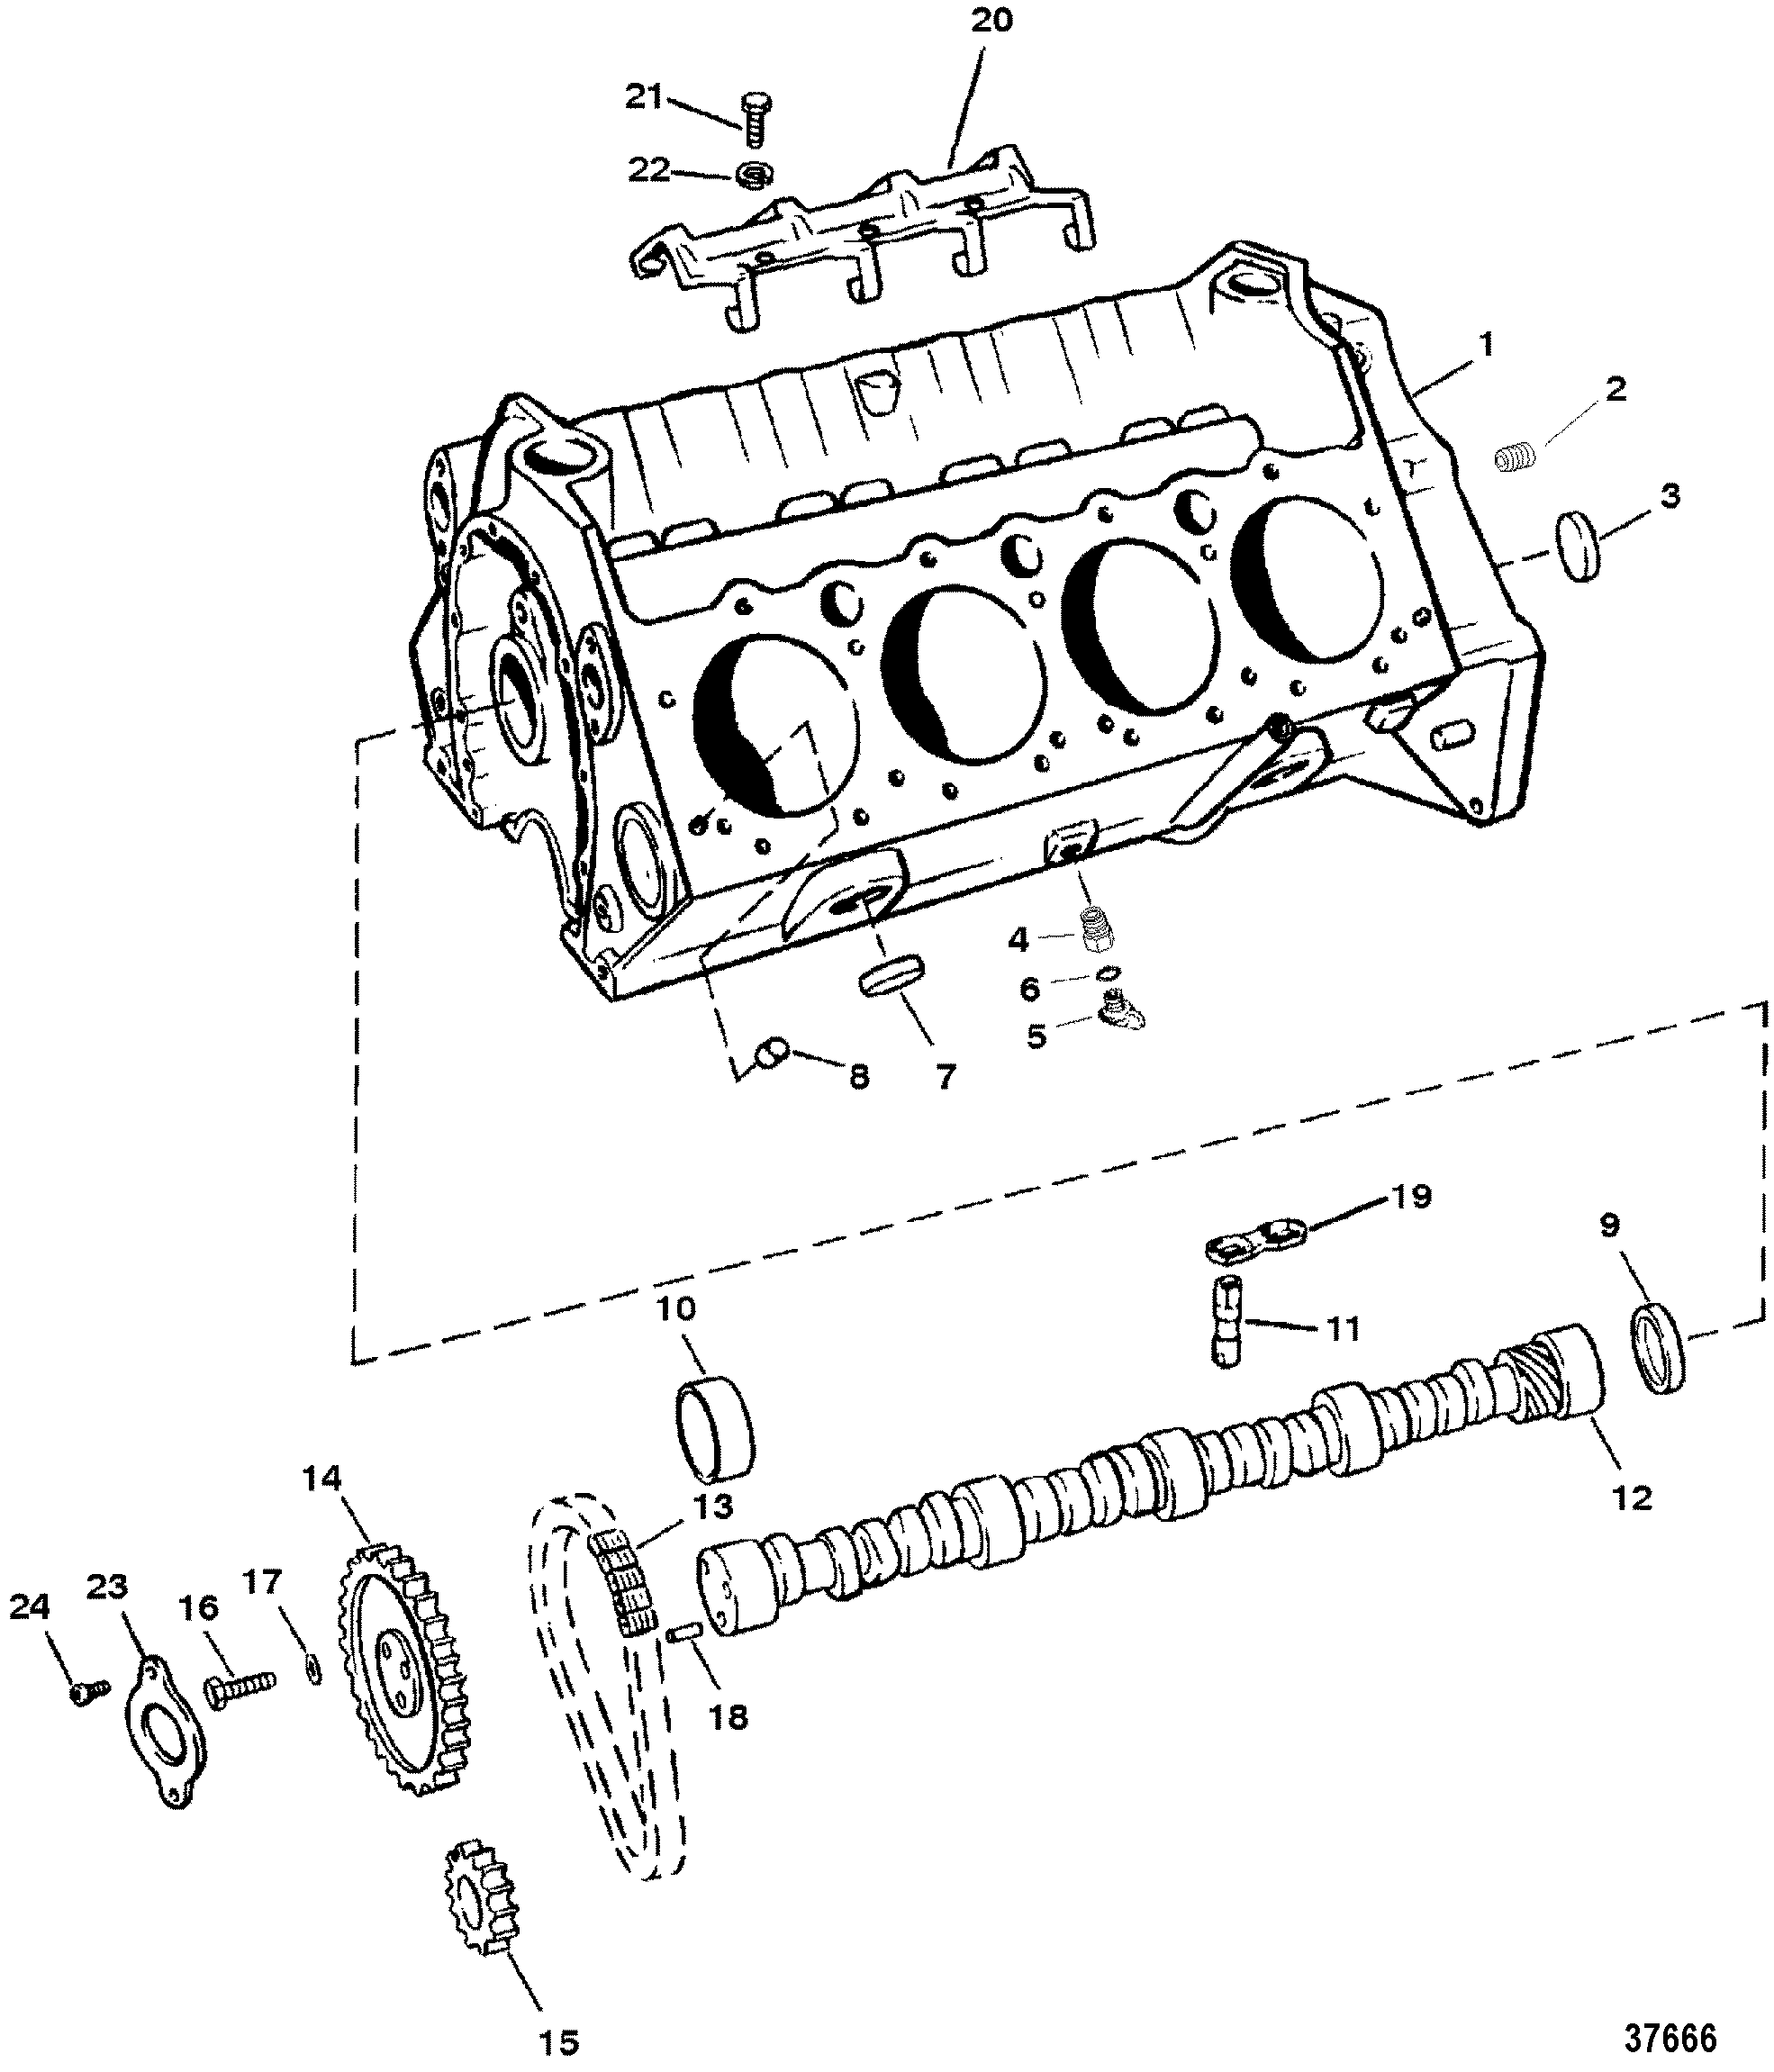 CYLINDER BLOCK AND CAMSHAFT(350 C.I.D. ROLLER LIFTERS)